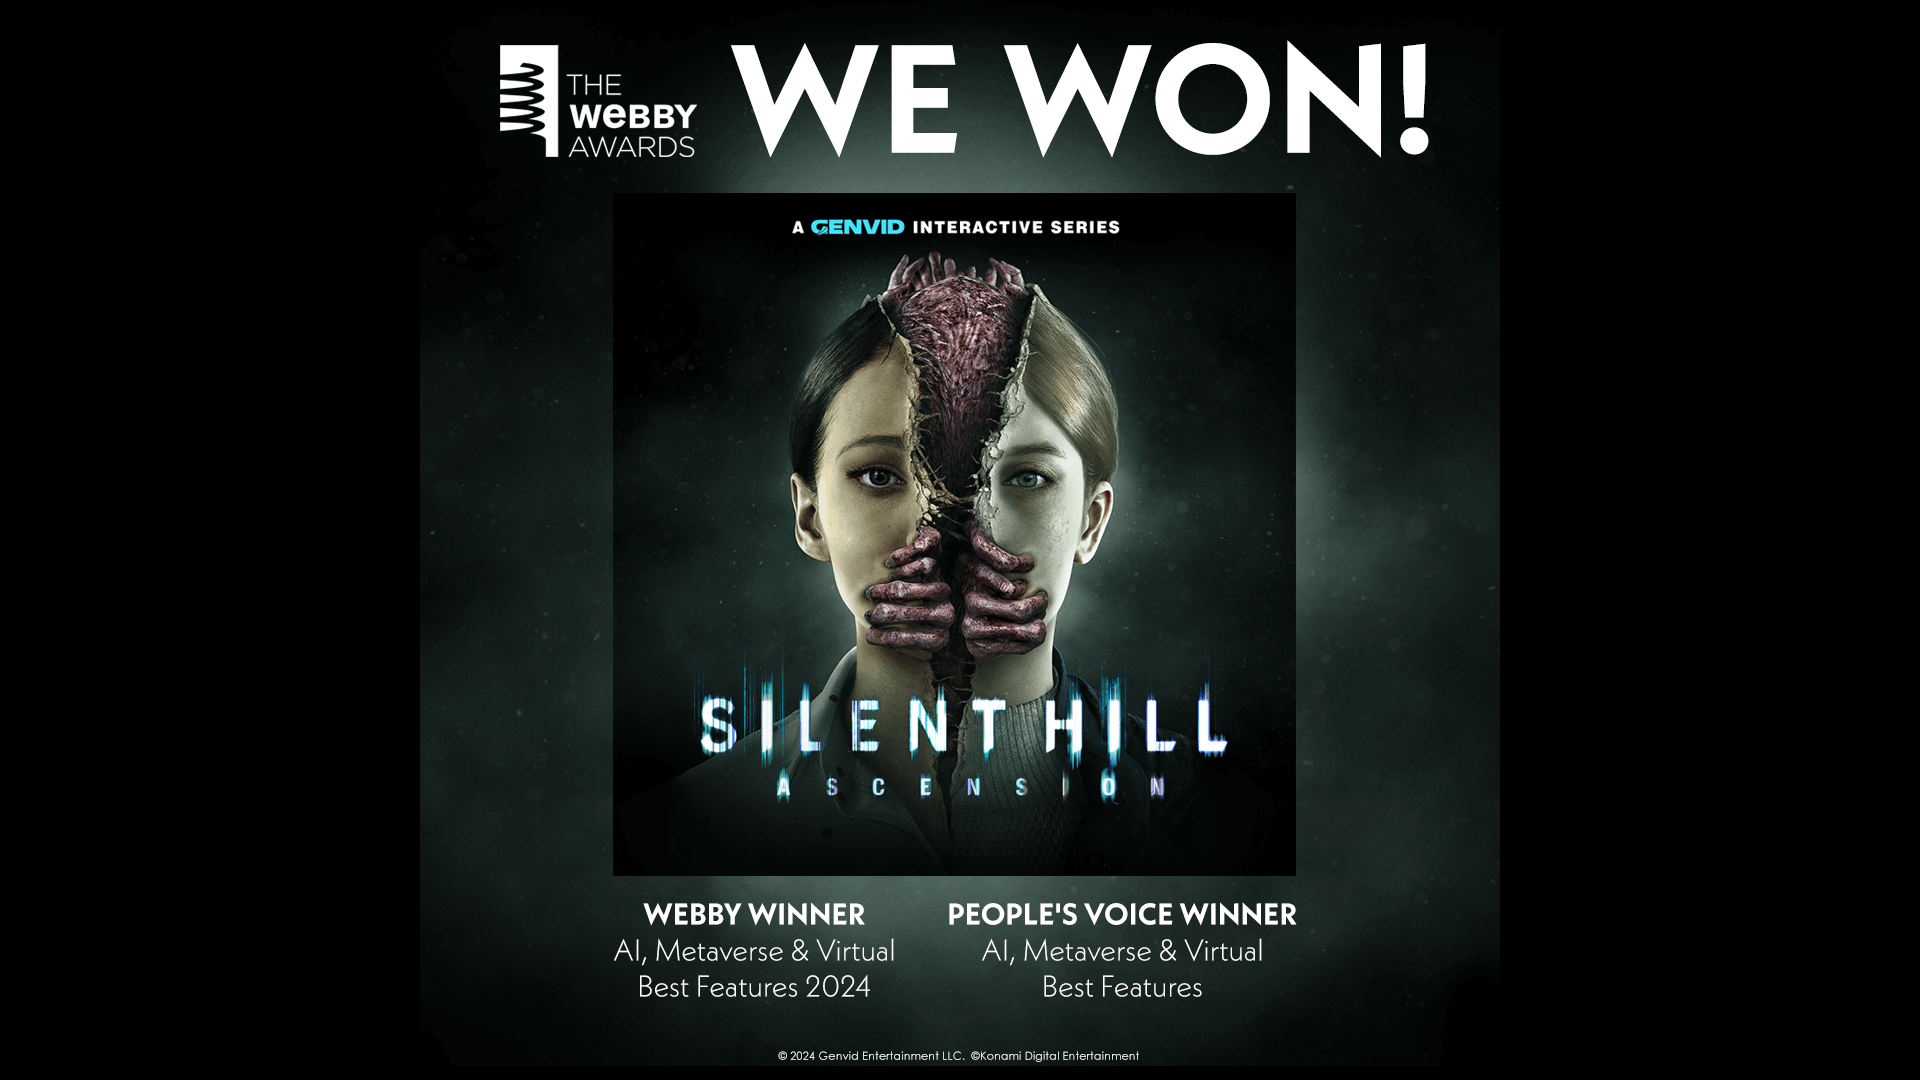 SILENT HILL: Ascension Wins Two Webby Awards